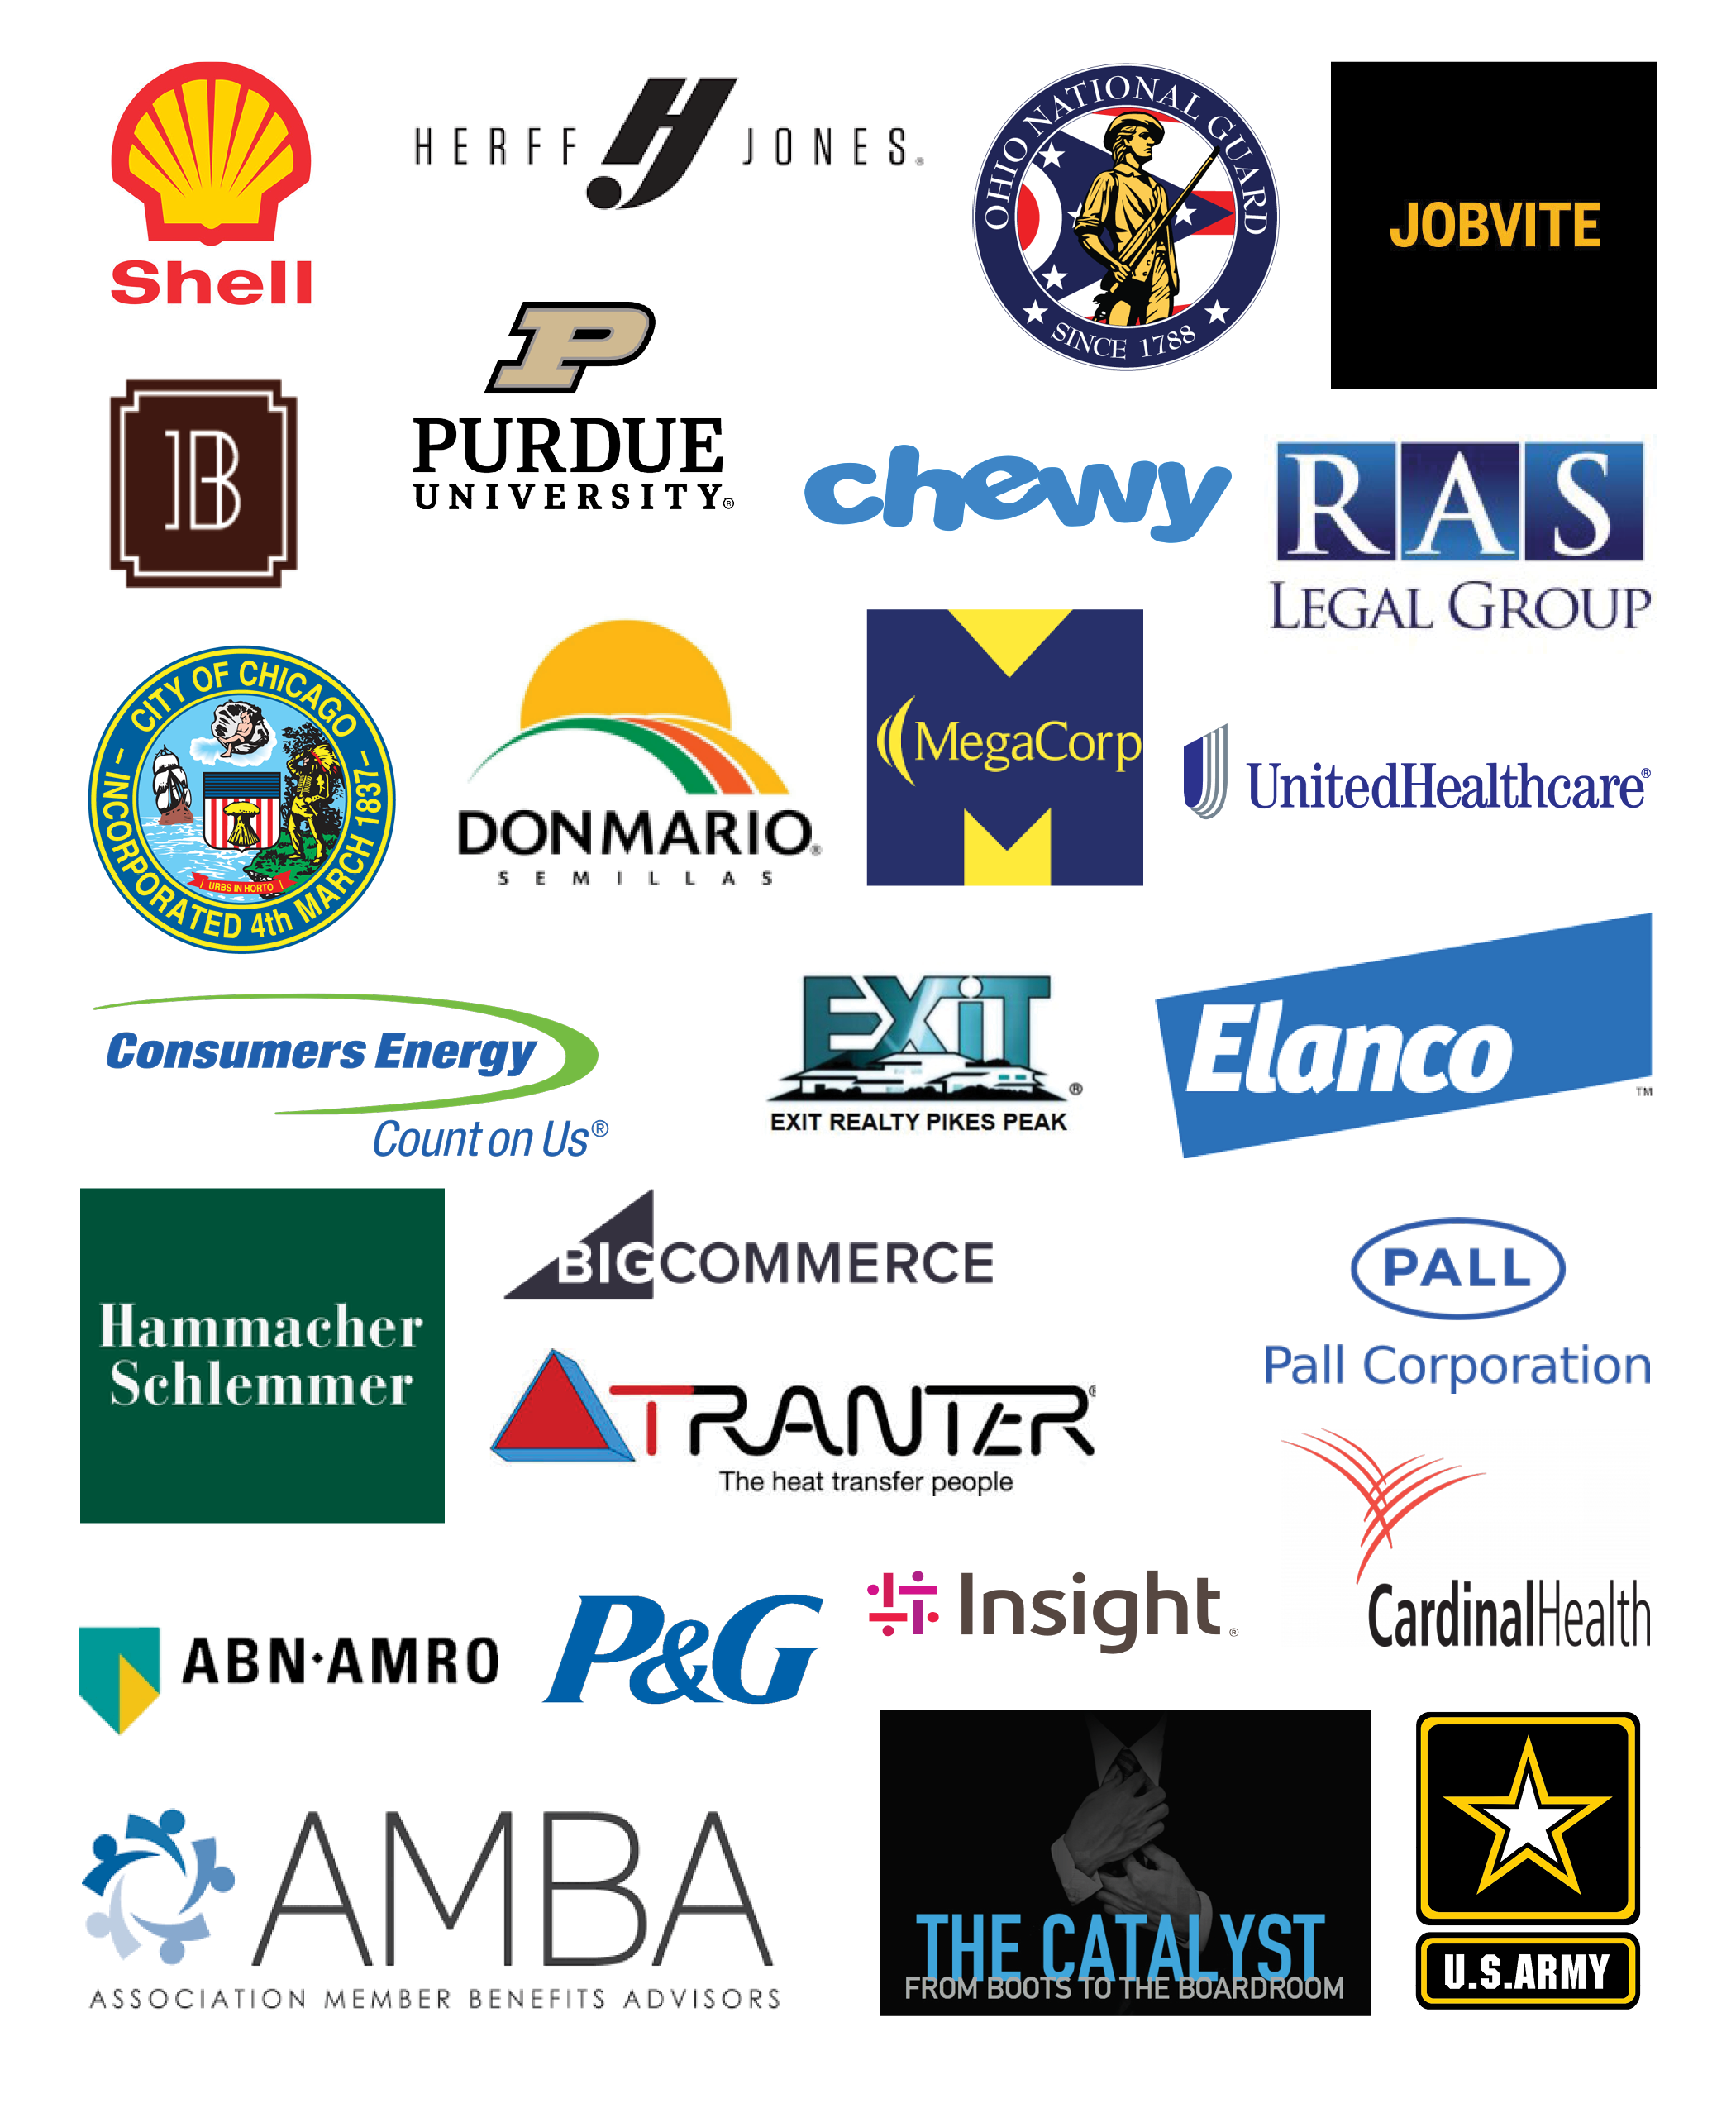 Shell, Chewy, Jobvite, Purdue University, RAS Legal Group, City of Chicago, Herff Jones, United Healthcare, Consumers Energy, Asociados Don Mario, Elanco, Hammacher Schlemmer, P&amp;G, Cardinal Health, U.S. Army